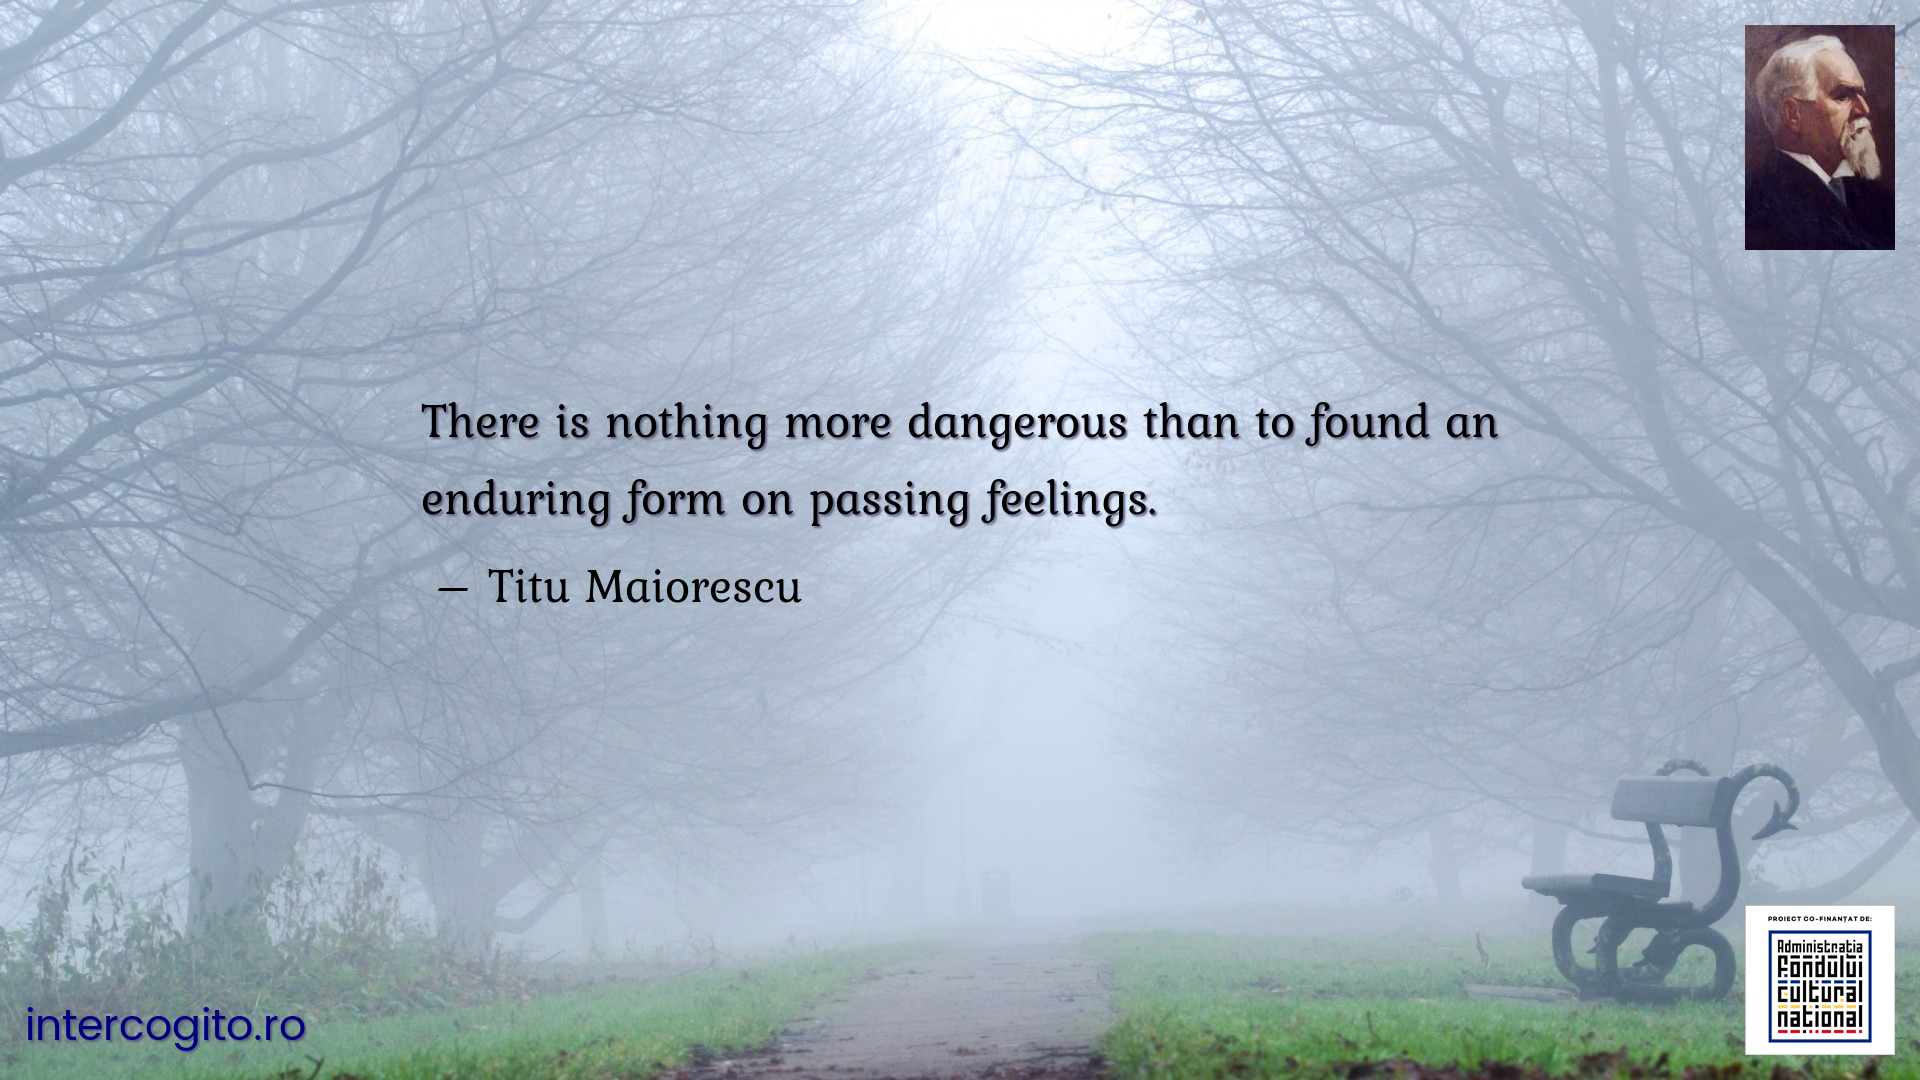 There is nothing more dangerous than to found an enduring form on passing feelings.